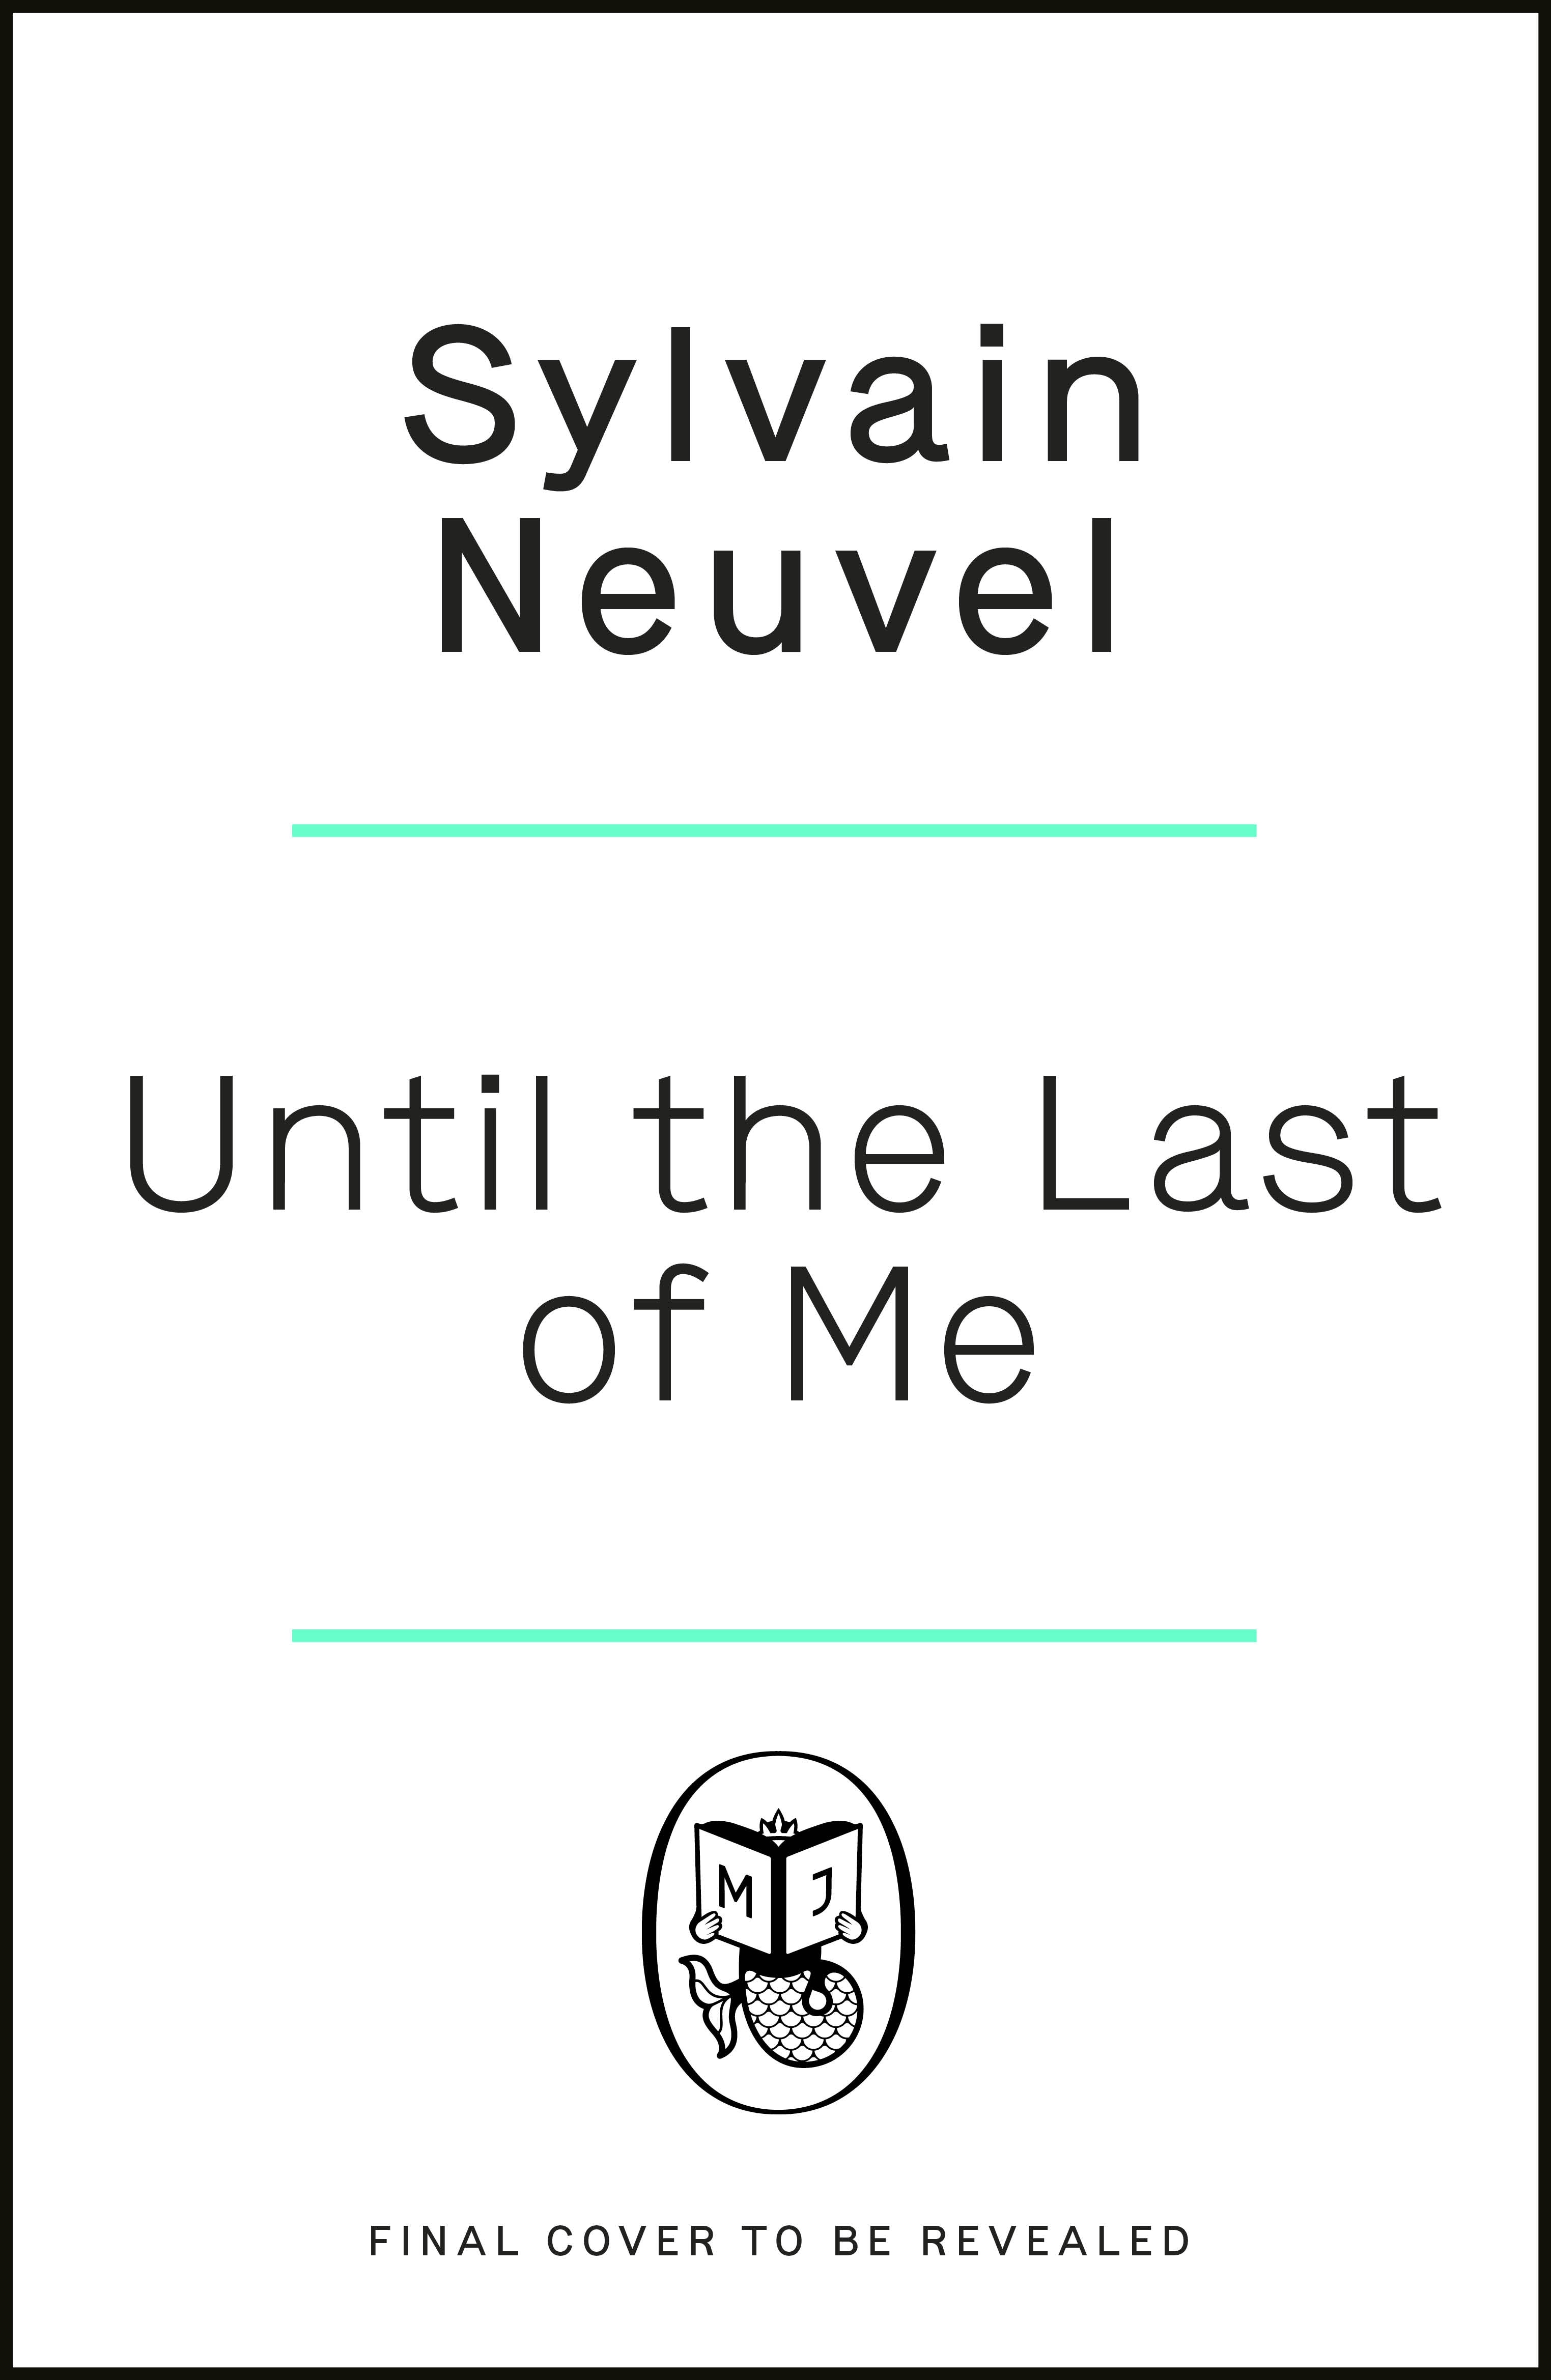 Book “Until the Last of Me” by Sylvain Neuvel — March 17, 2022